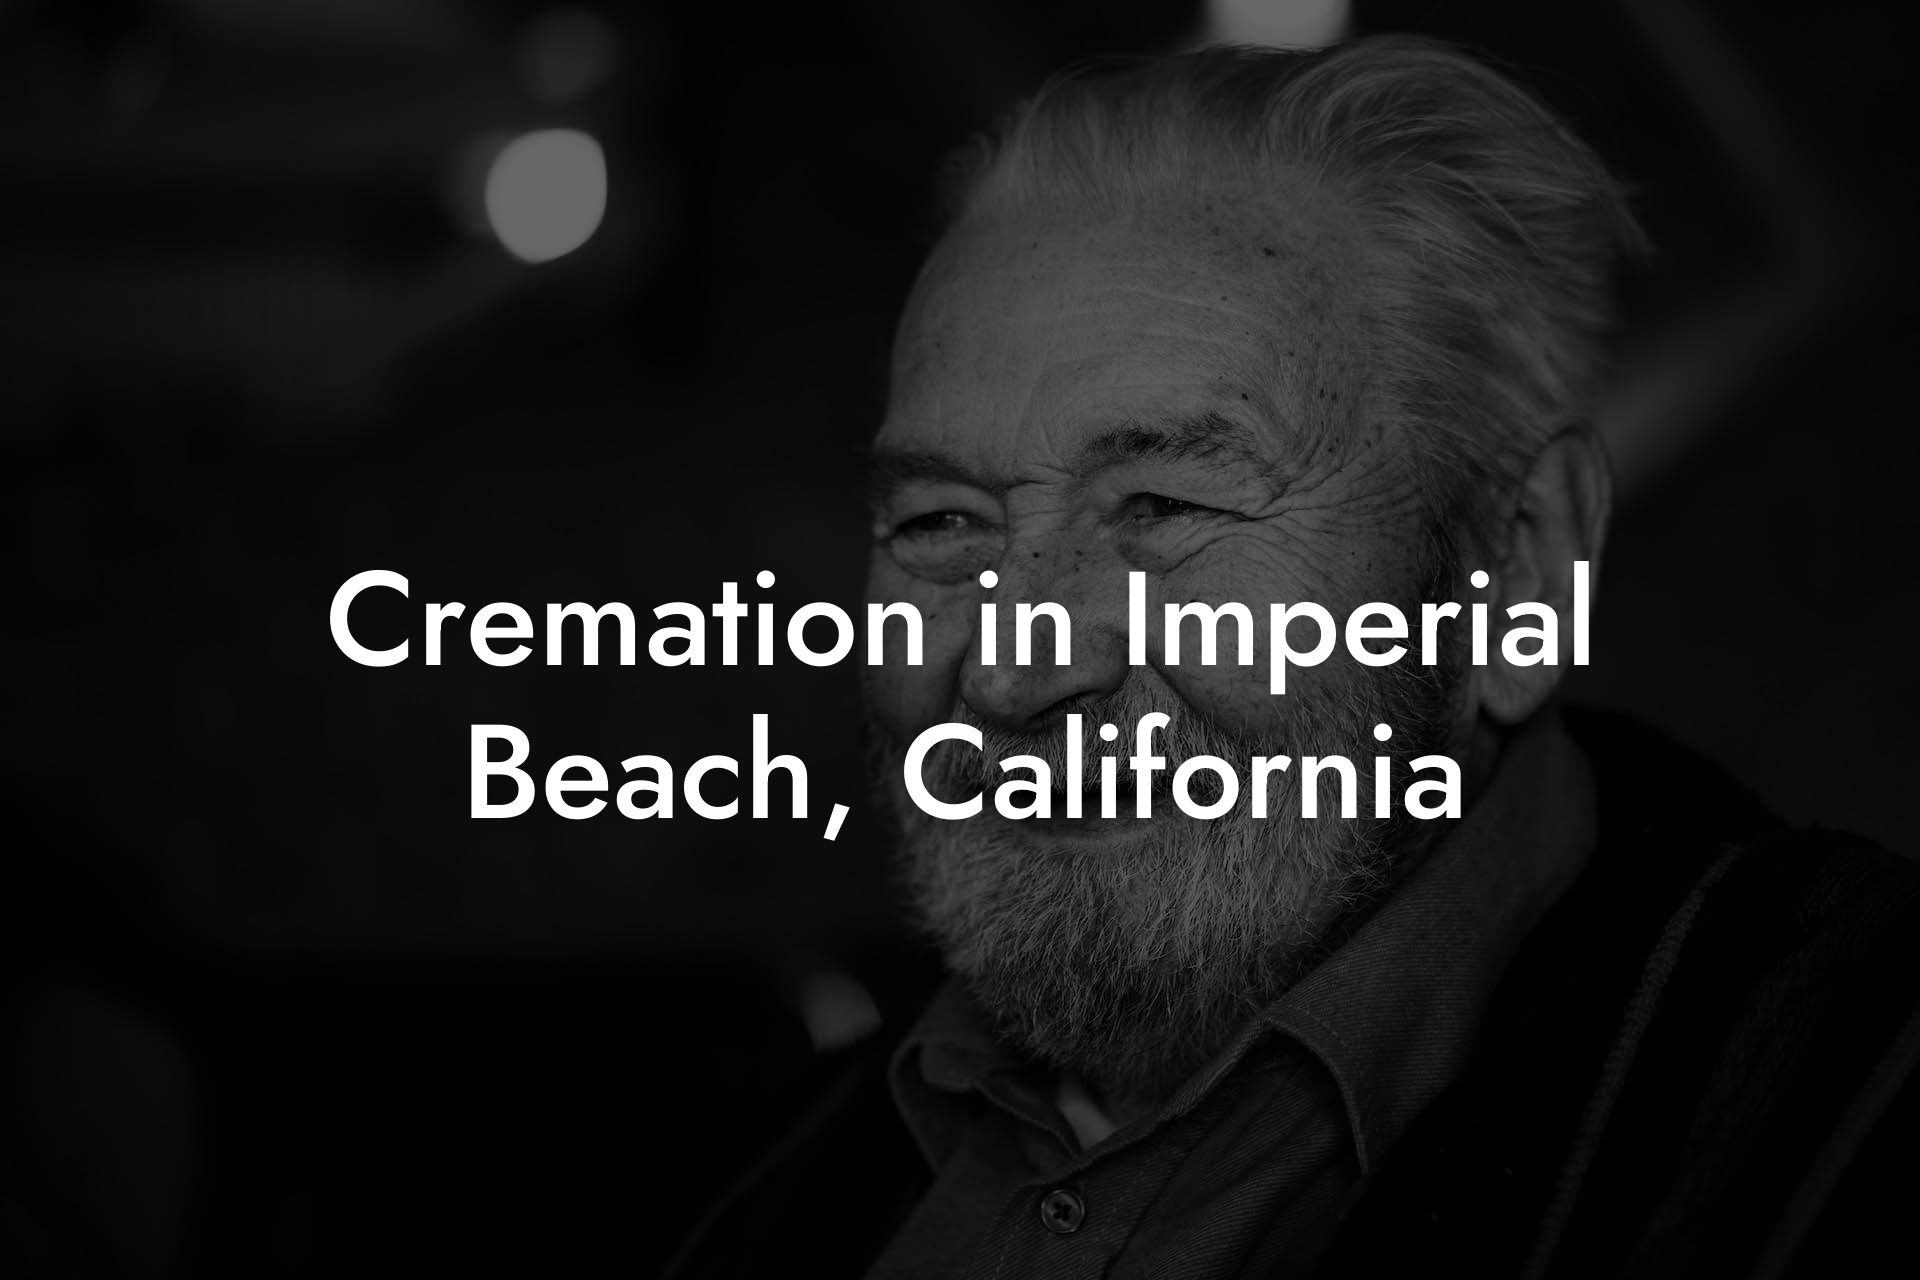 Cremation in Imperial Beach, California